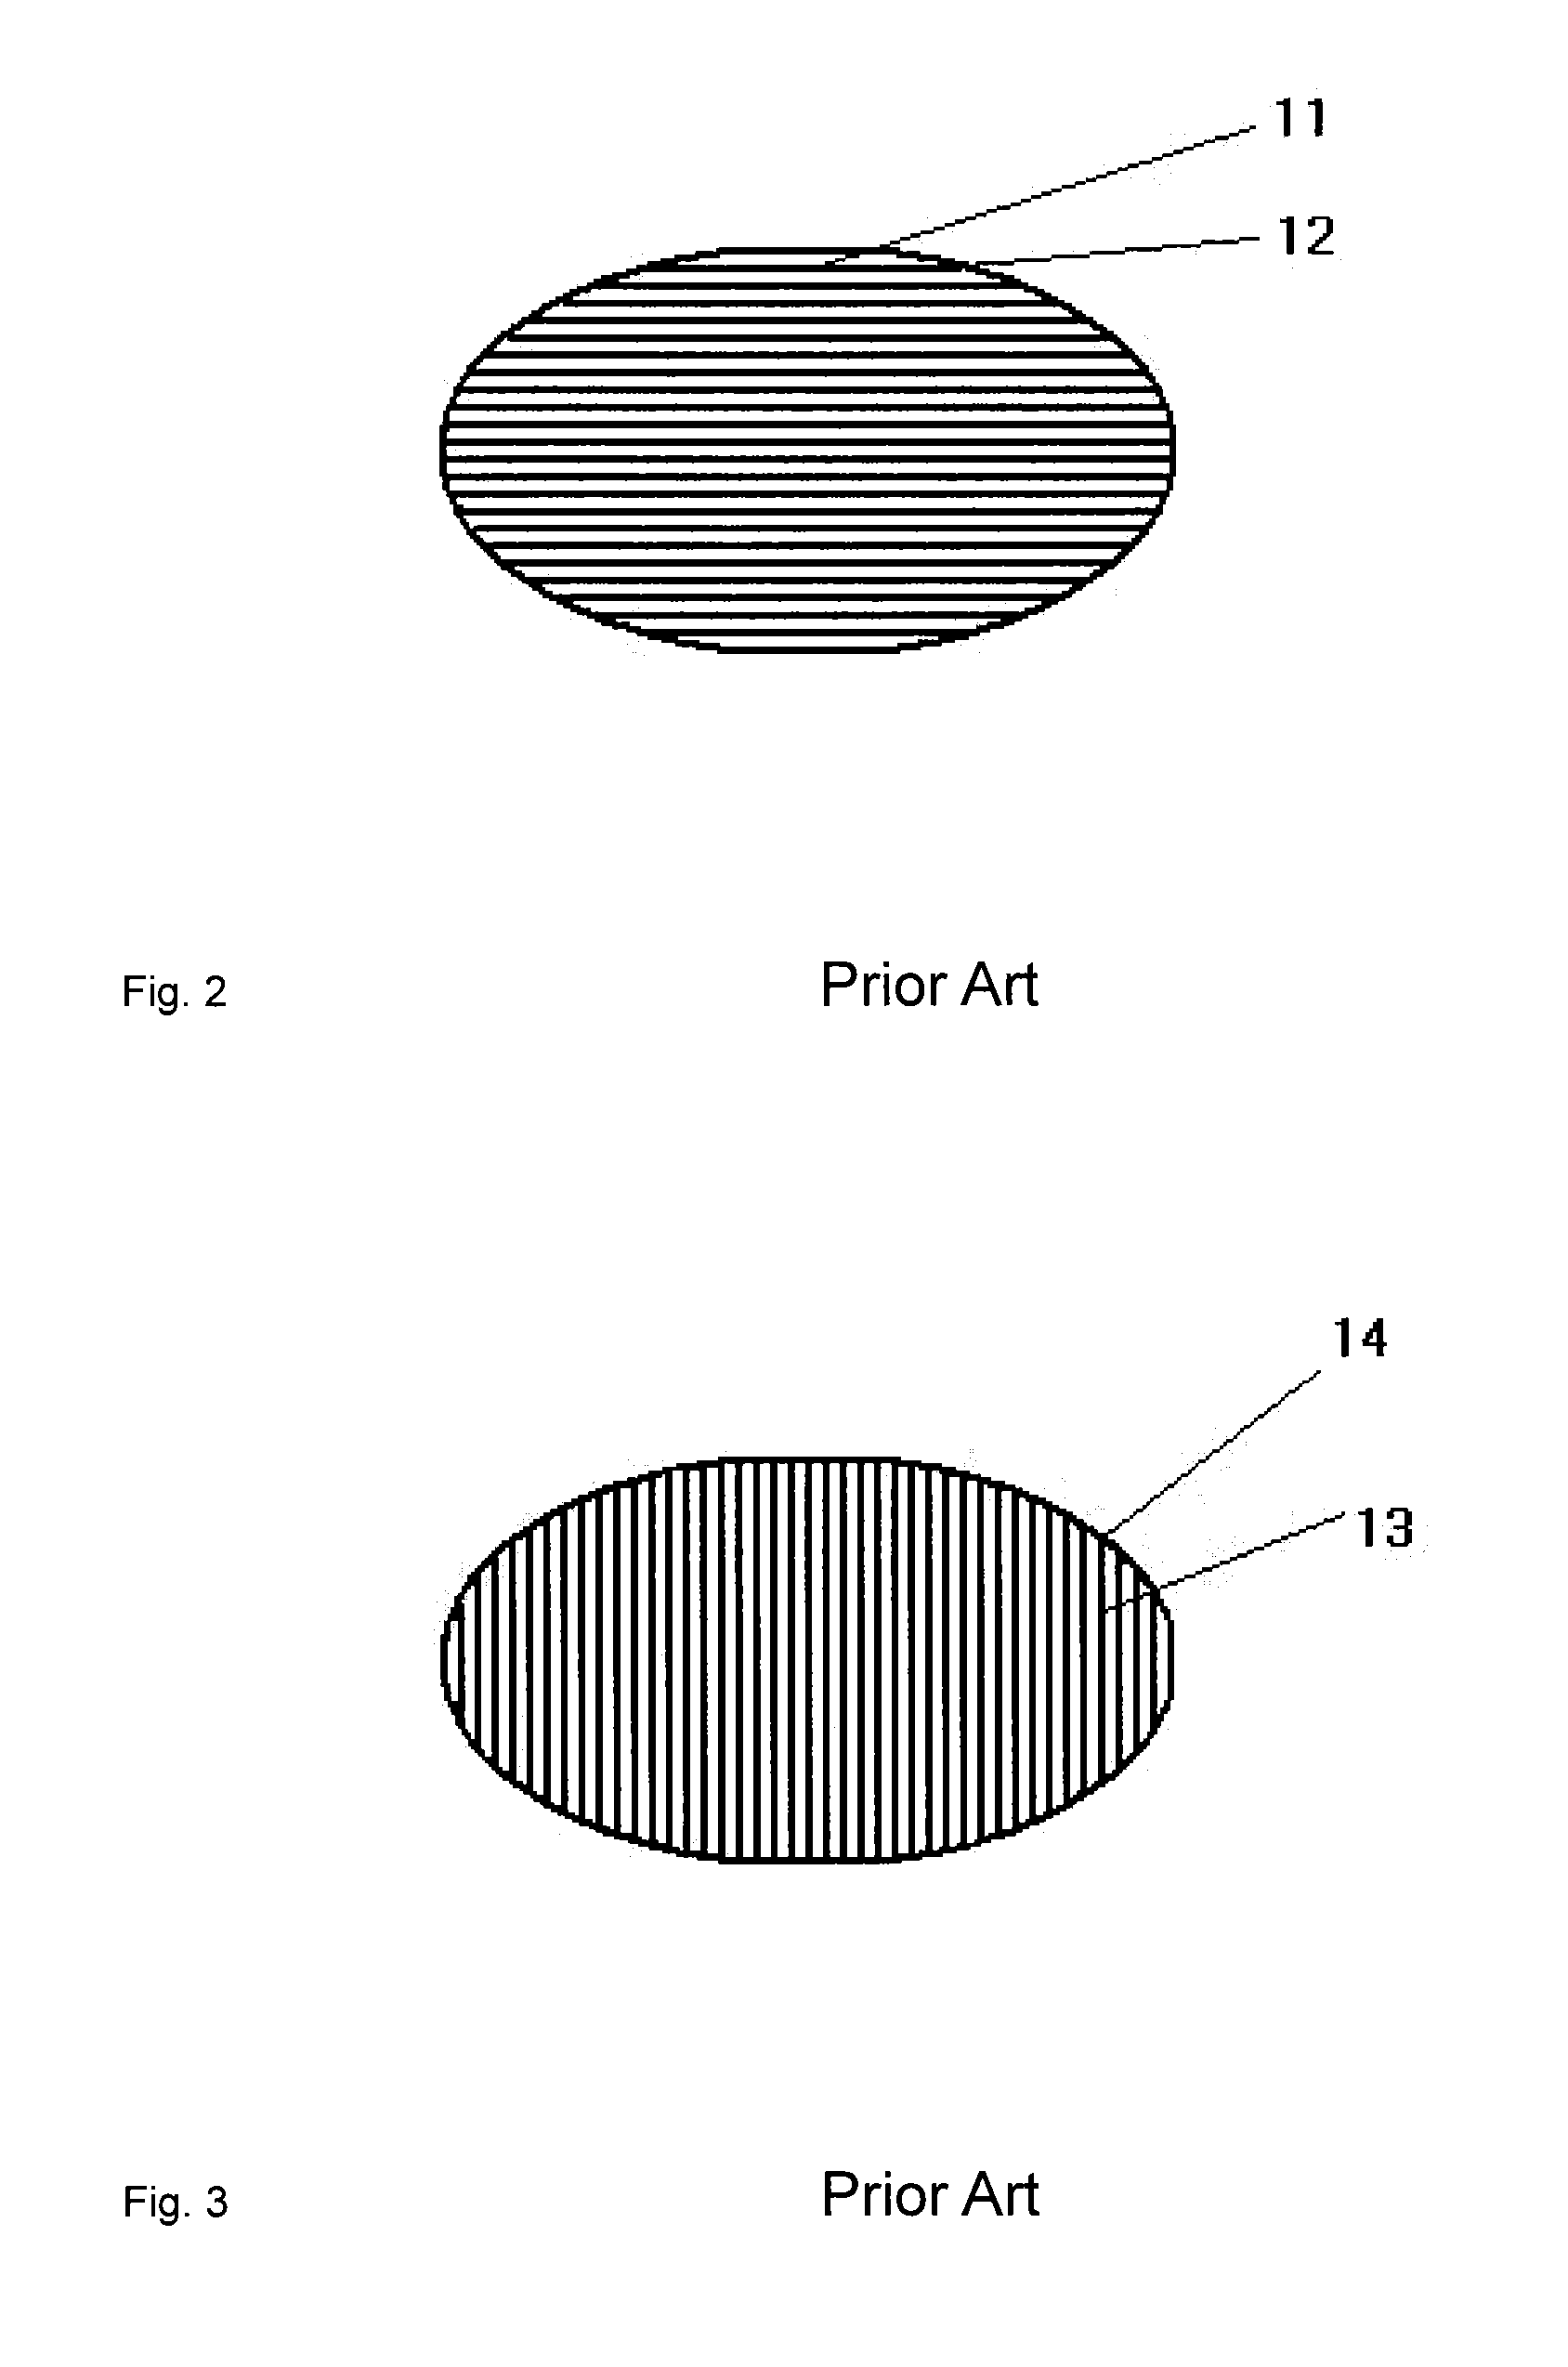 Process for melting/sintering powder particles for the layer-by-layer production of three-dimensional objects